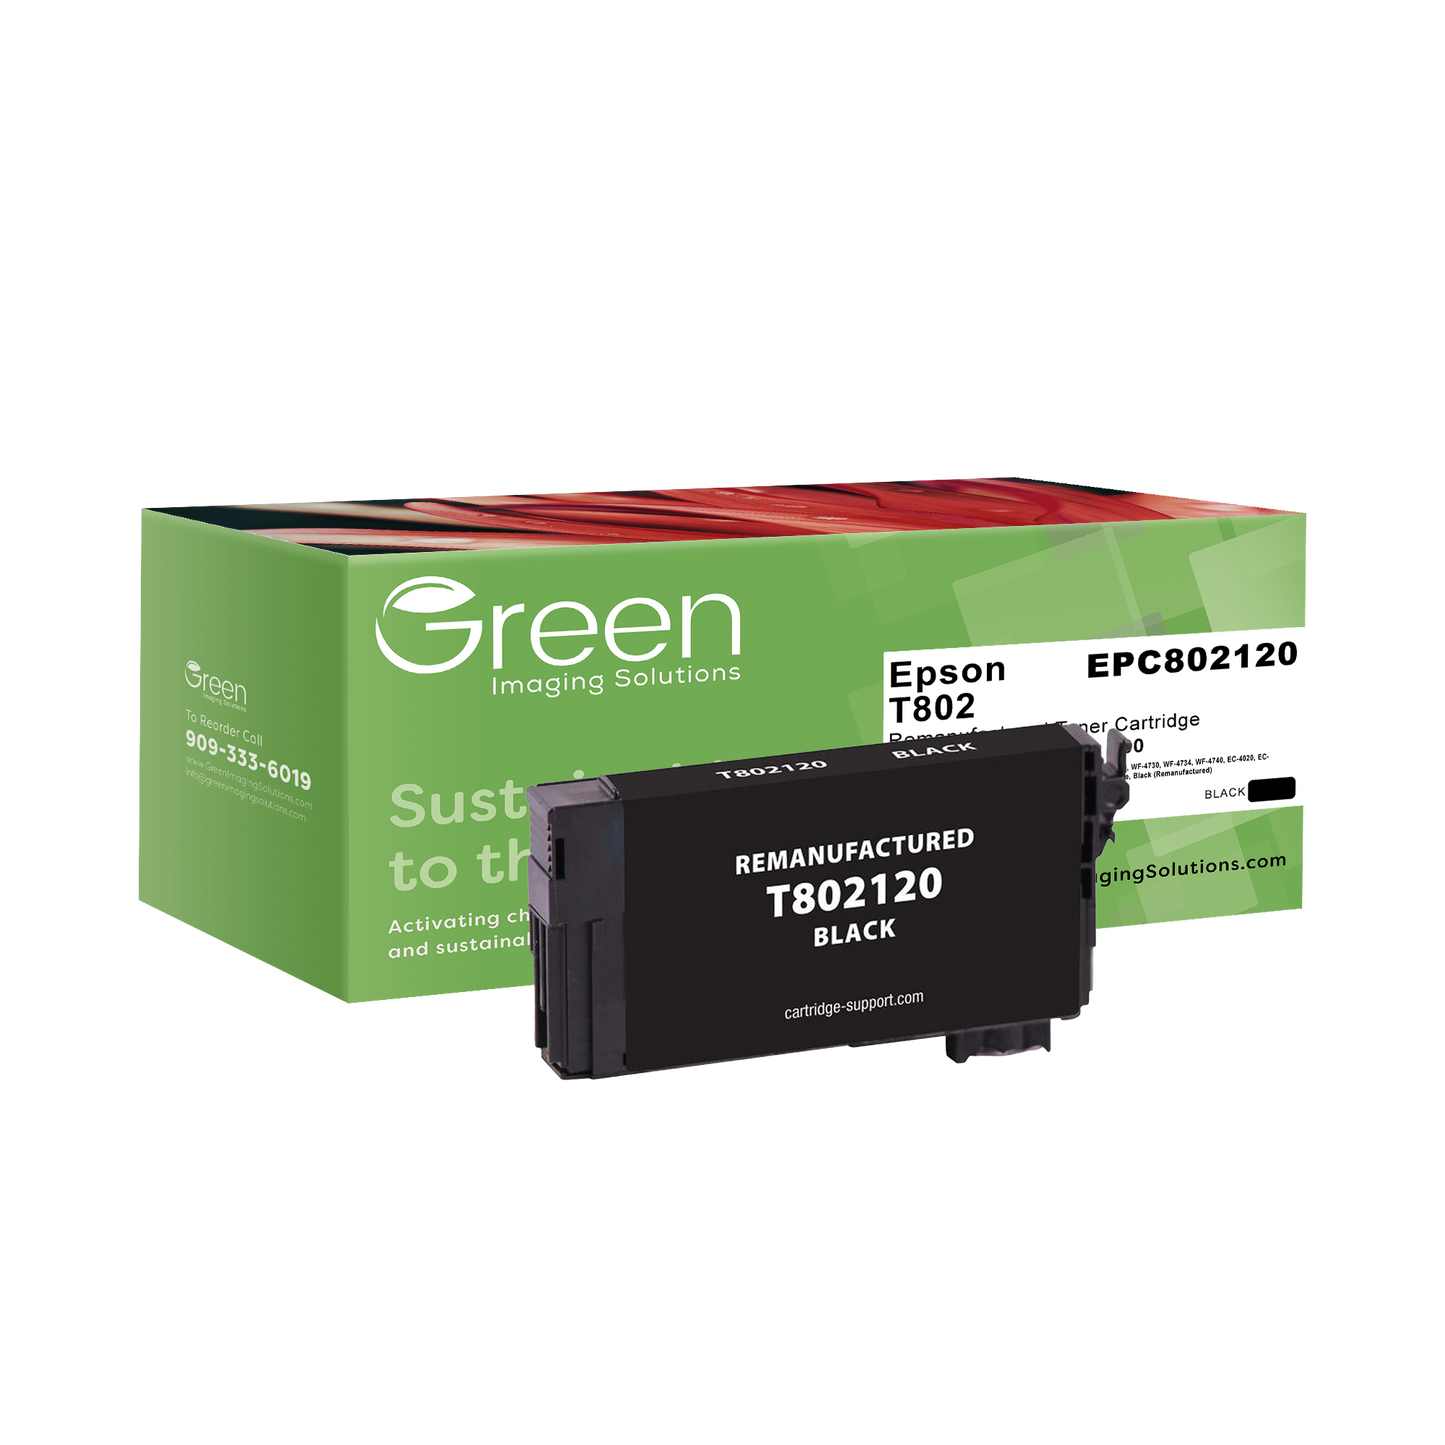 Green Imaging Solutions USA Remanufactured Black Ink Cartridge for Epson T802120